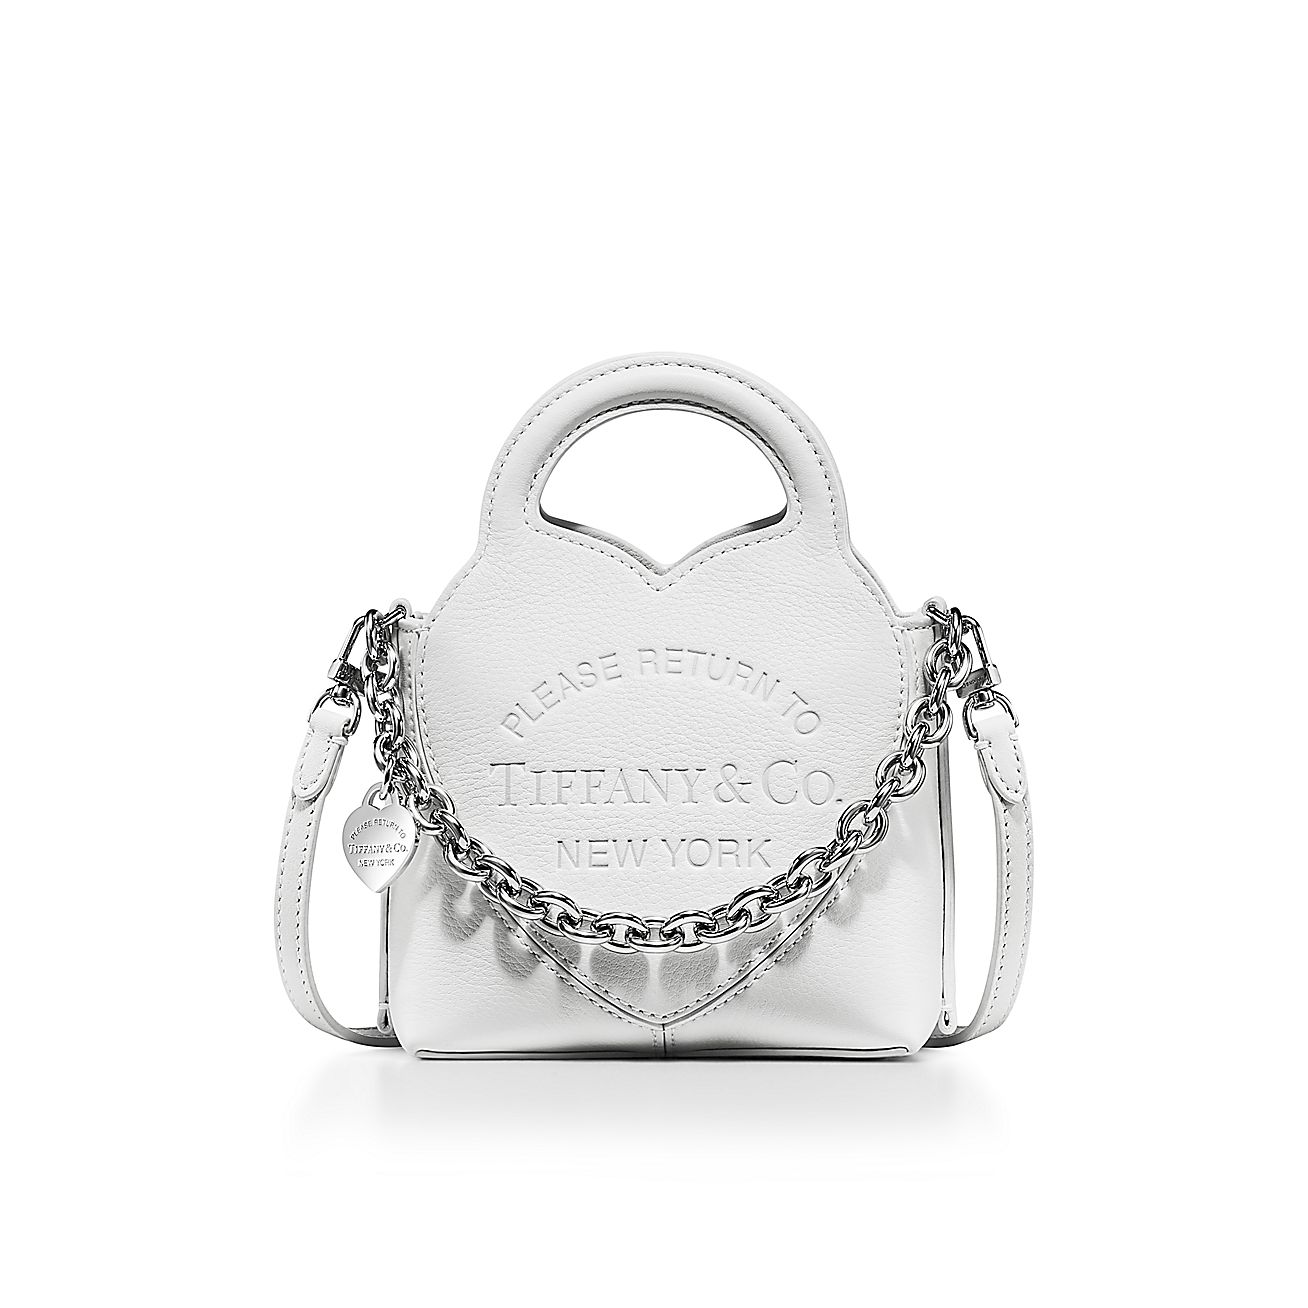 Return to Tiffany® Micro Tote in White Leather